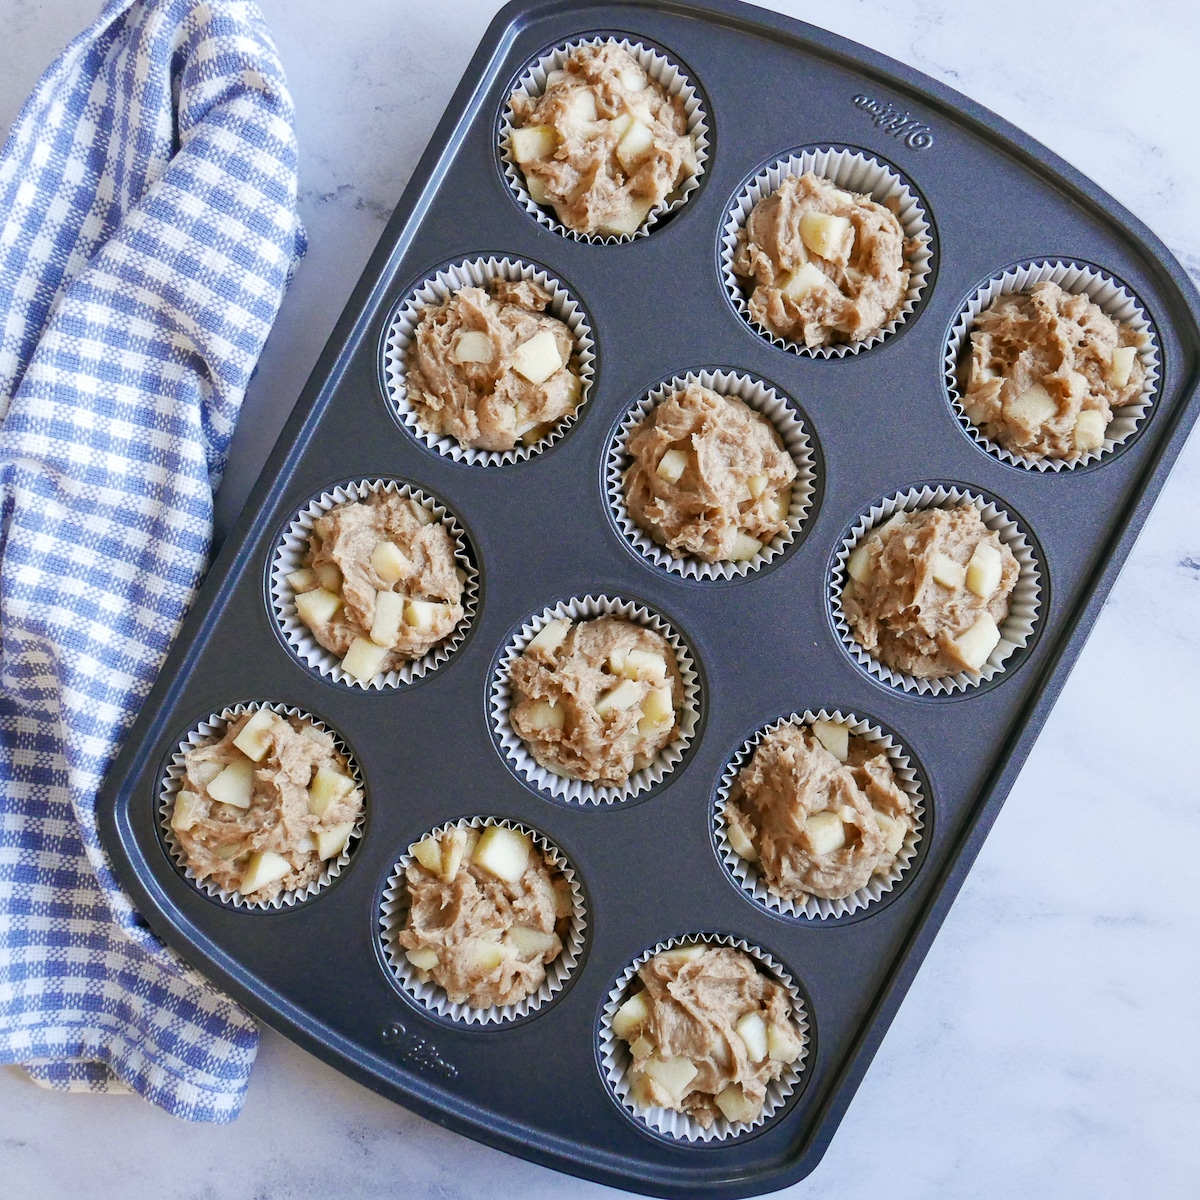 Muffin tin filled with apple muffin batter and a napkin on the side.